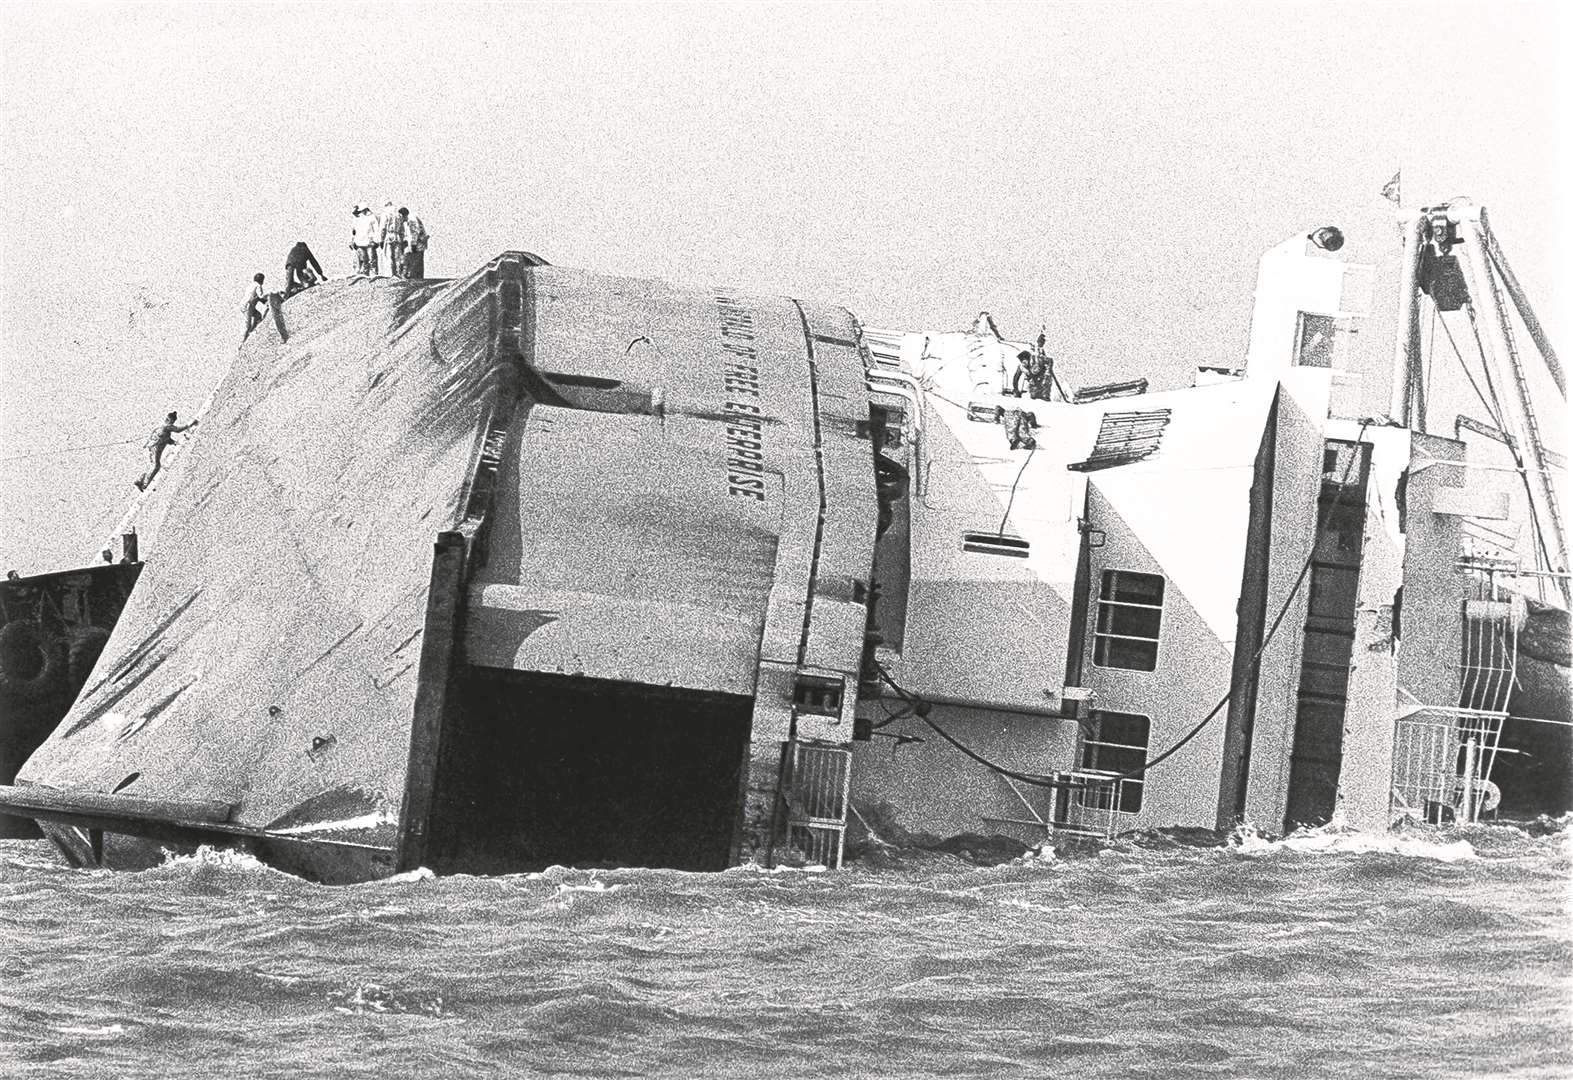 The Herald of Free Enterprise capsized just outside of the Zeebrugge harbour walls